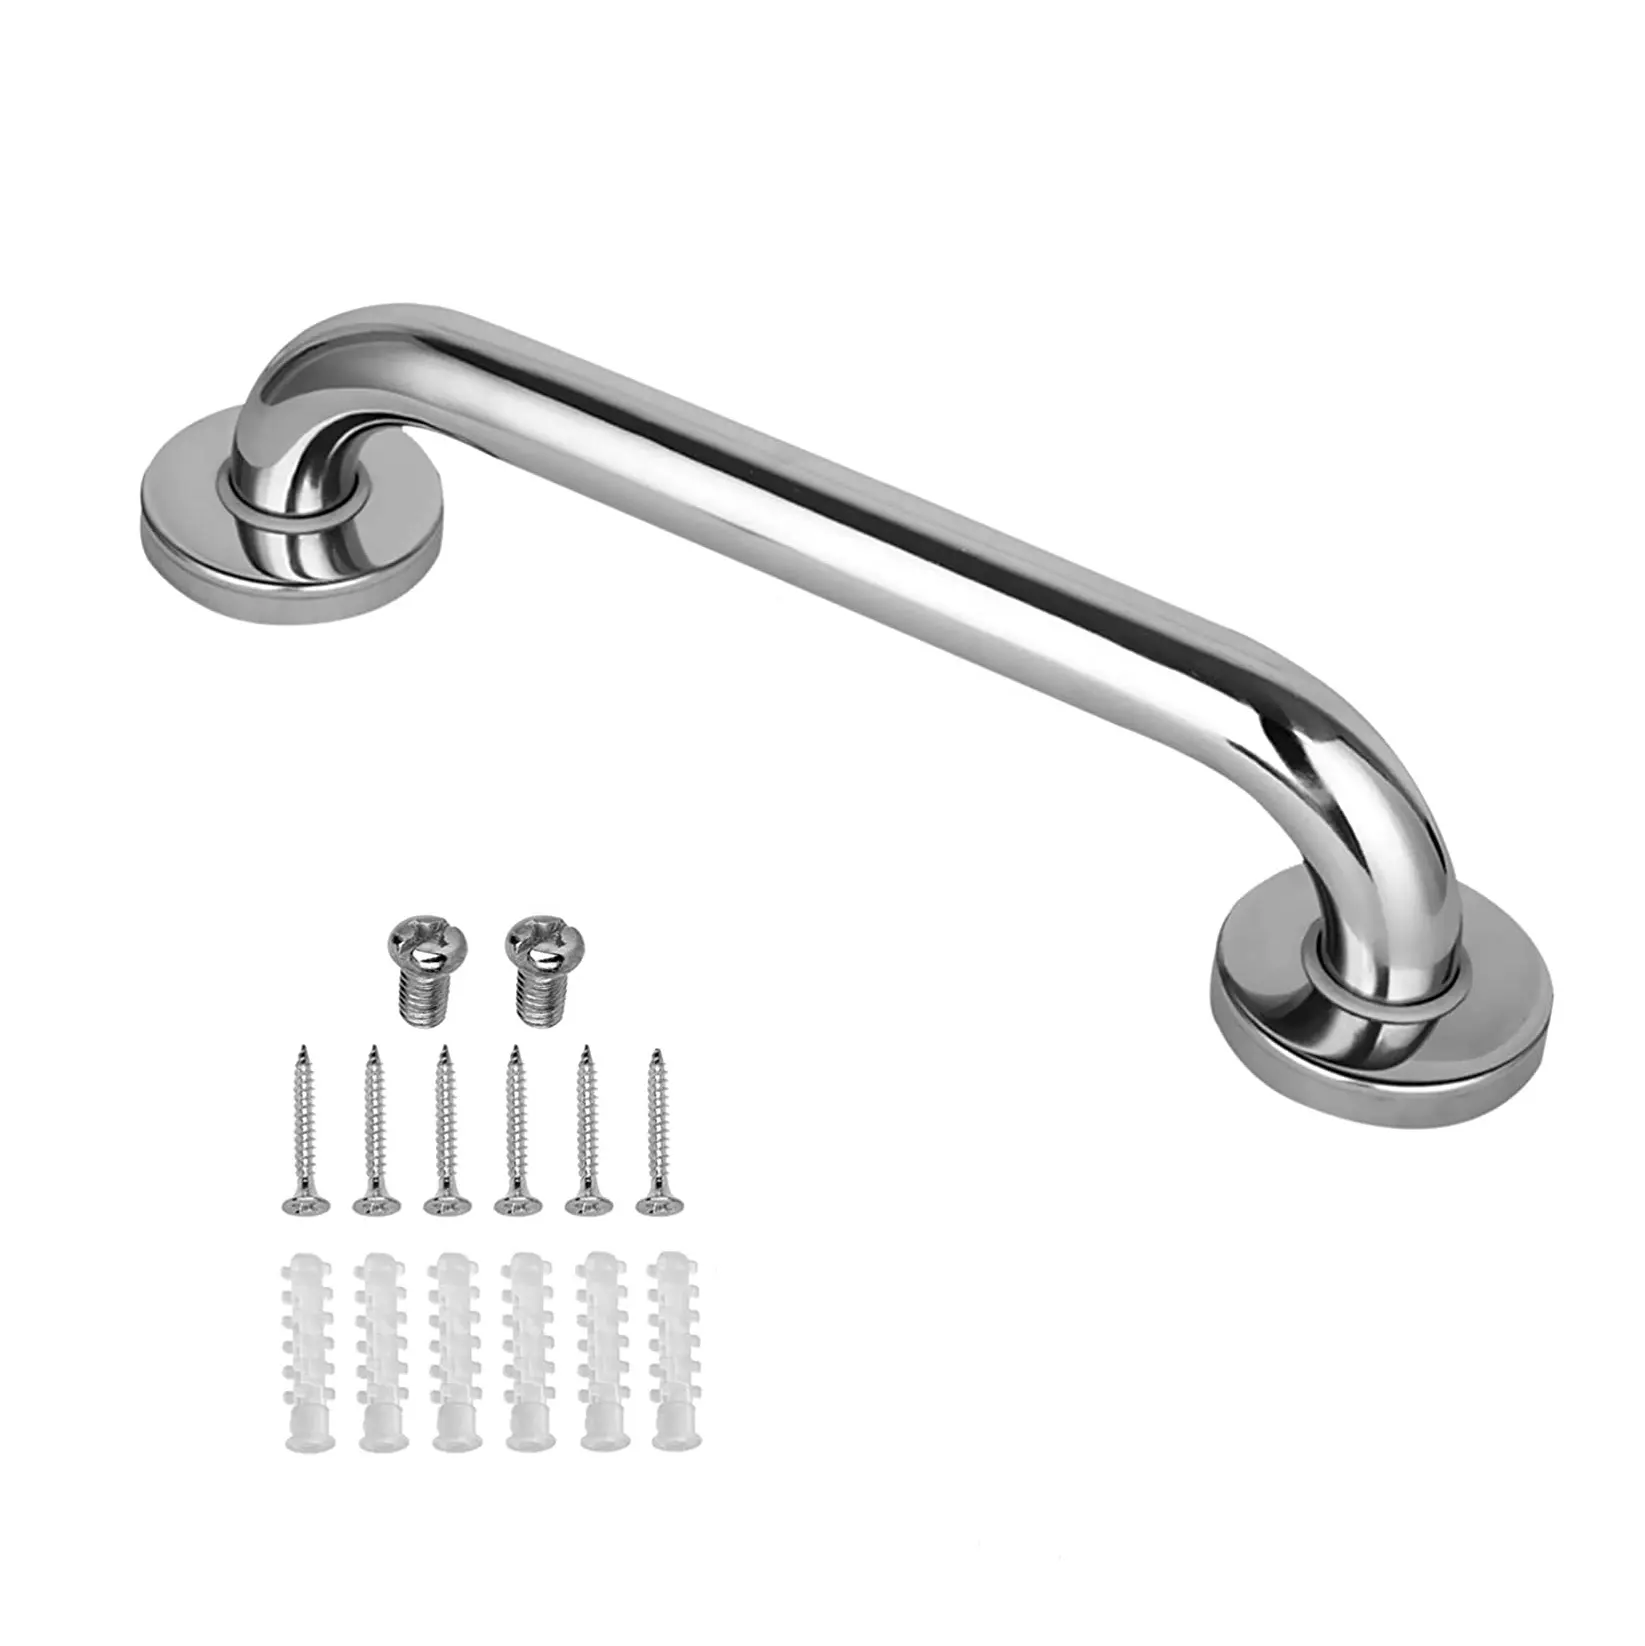 Factory Made New Design Stainless Steel Bathroom Handrail Safety Disabled Handrail Bathroom Shower Accessories Handle Grab Bar